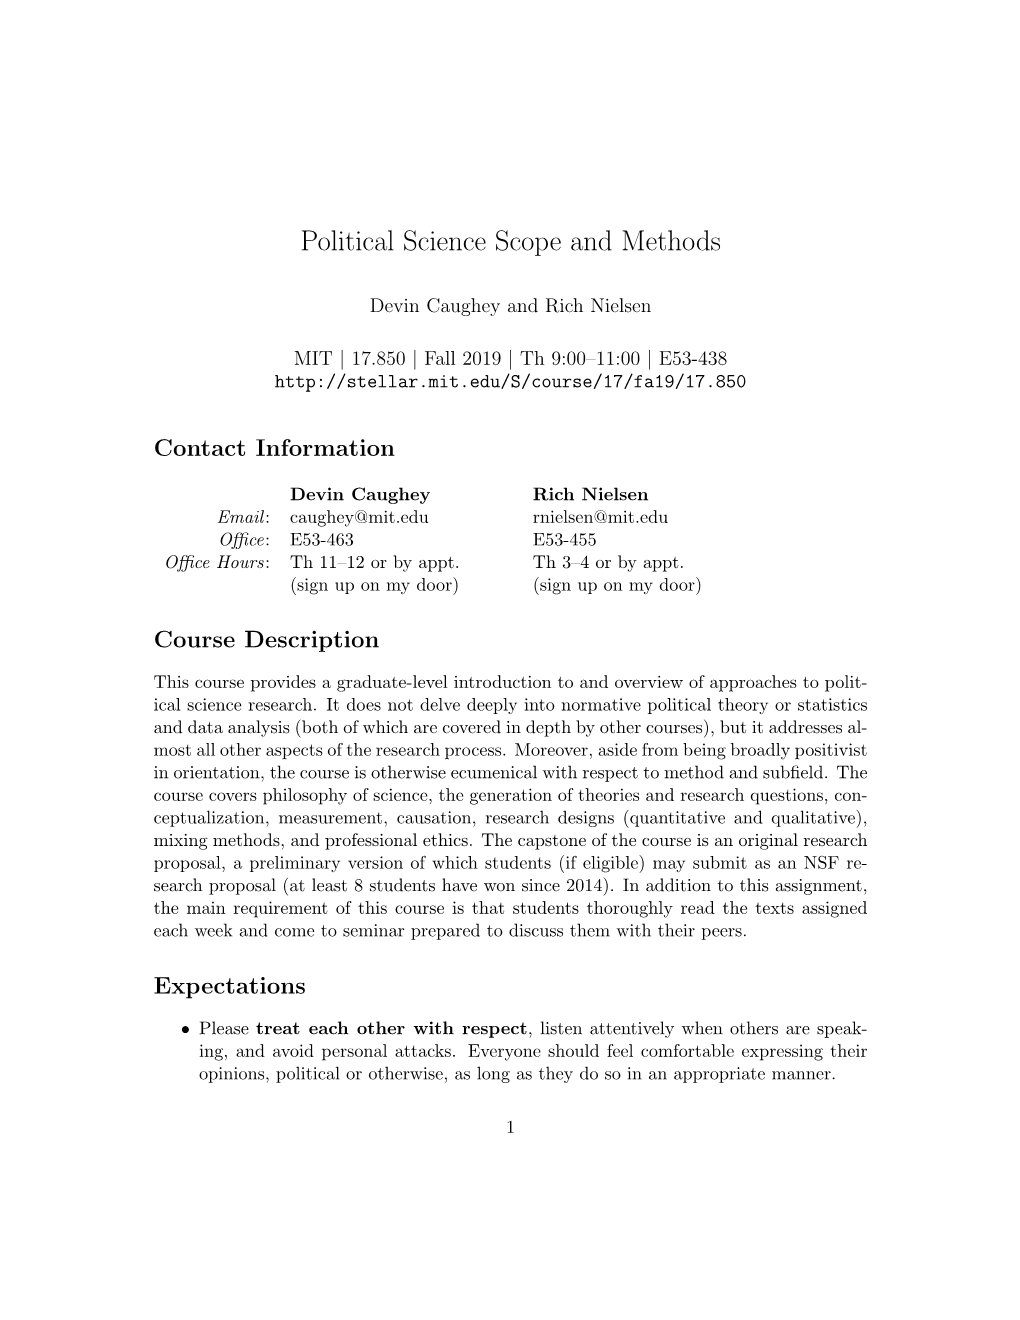 Political Science Scope and Methods